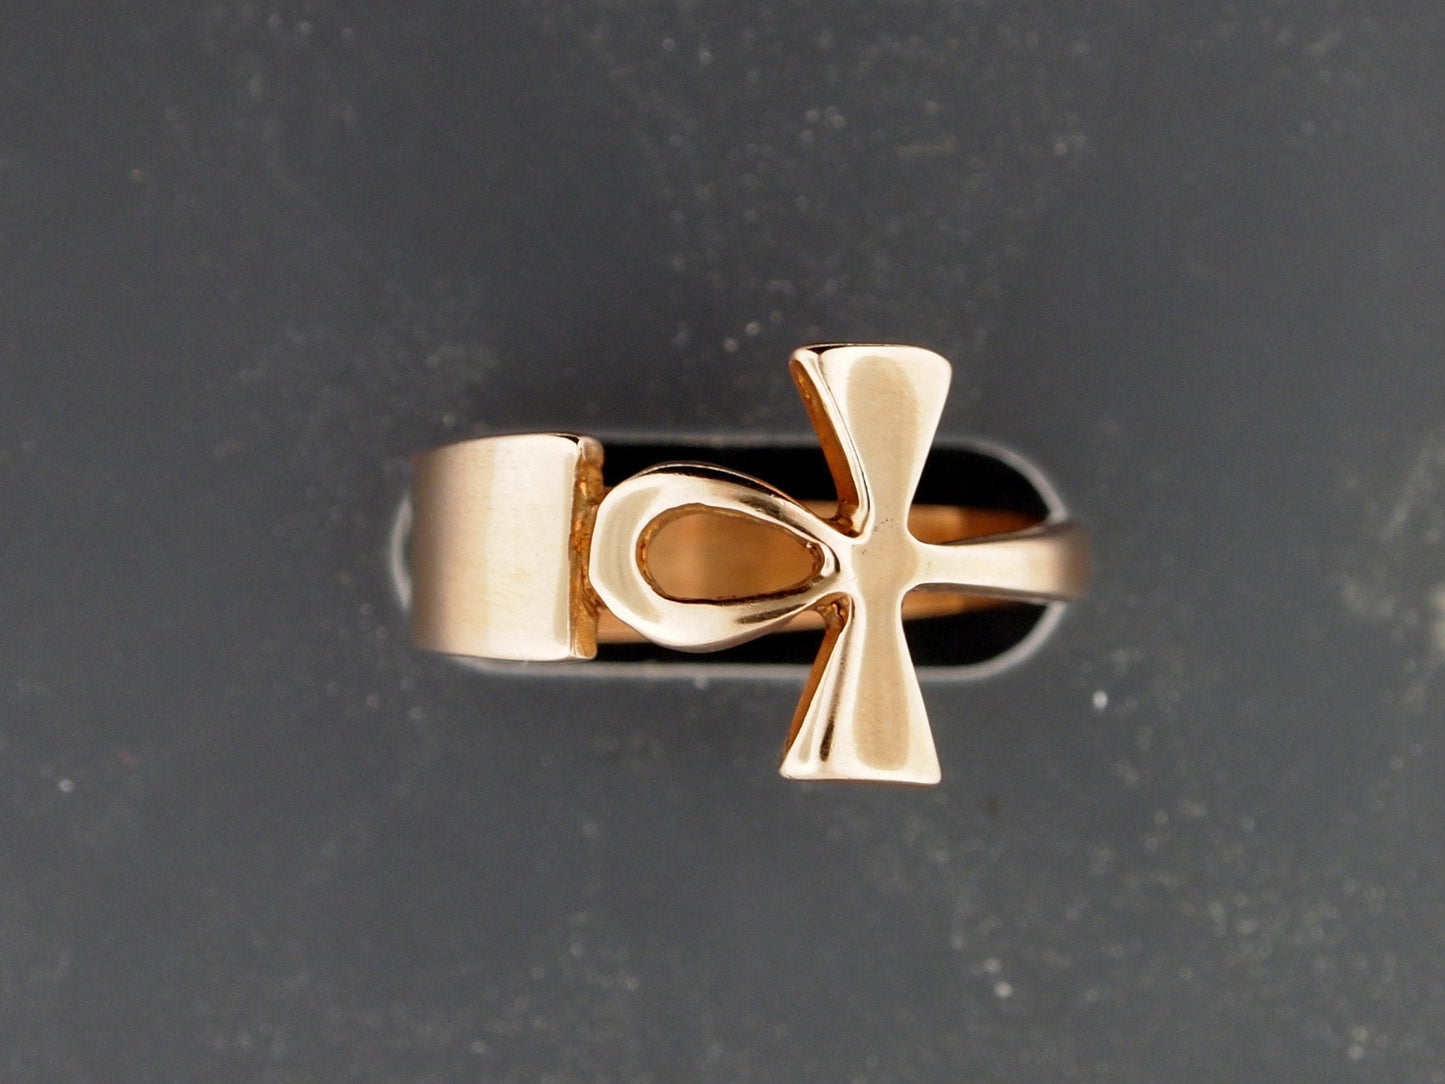 Wrap Around Ankh Ring in Sterling Silver or Antique Bronze